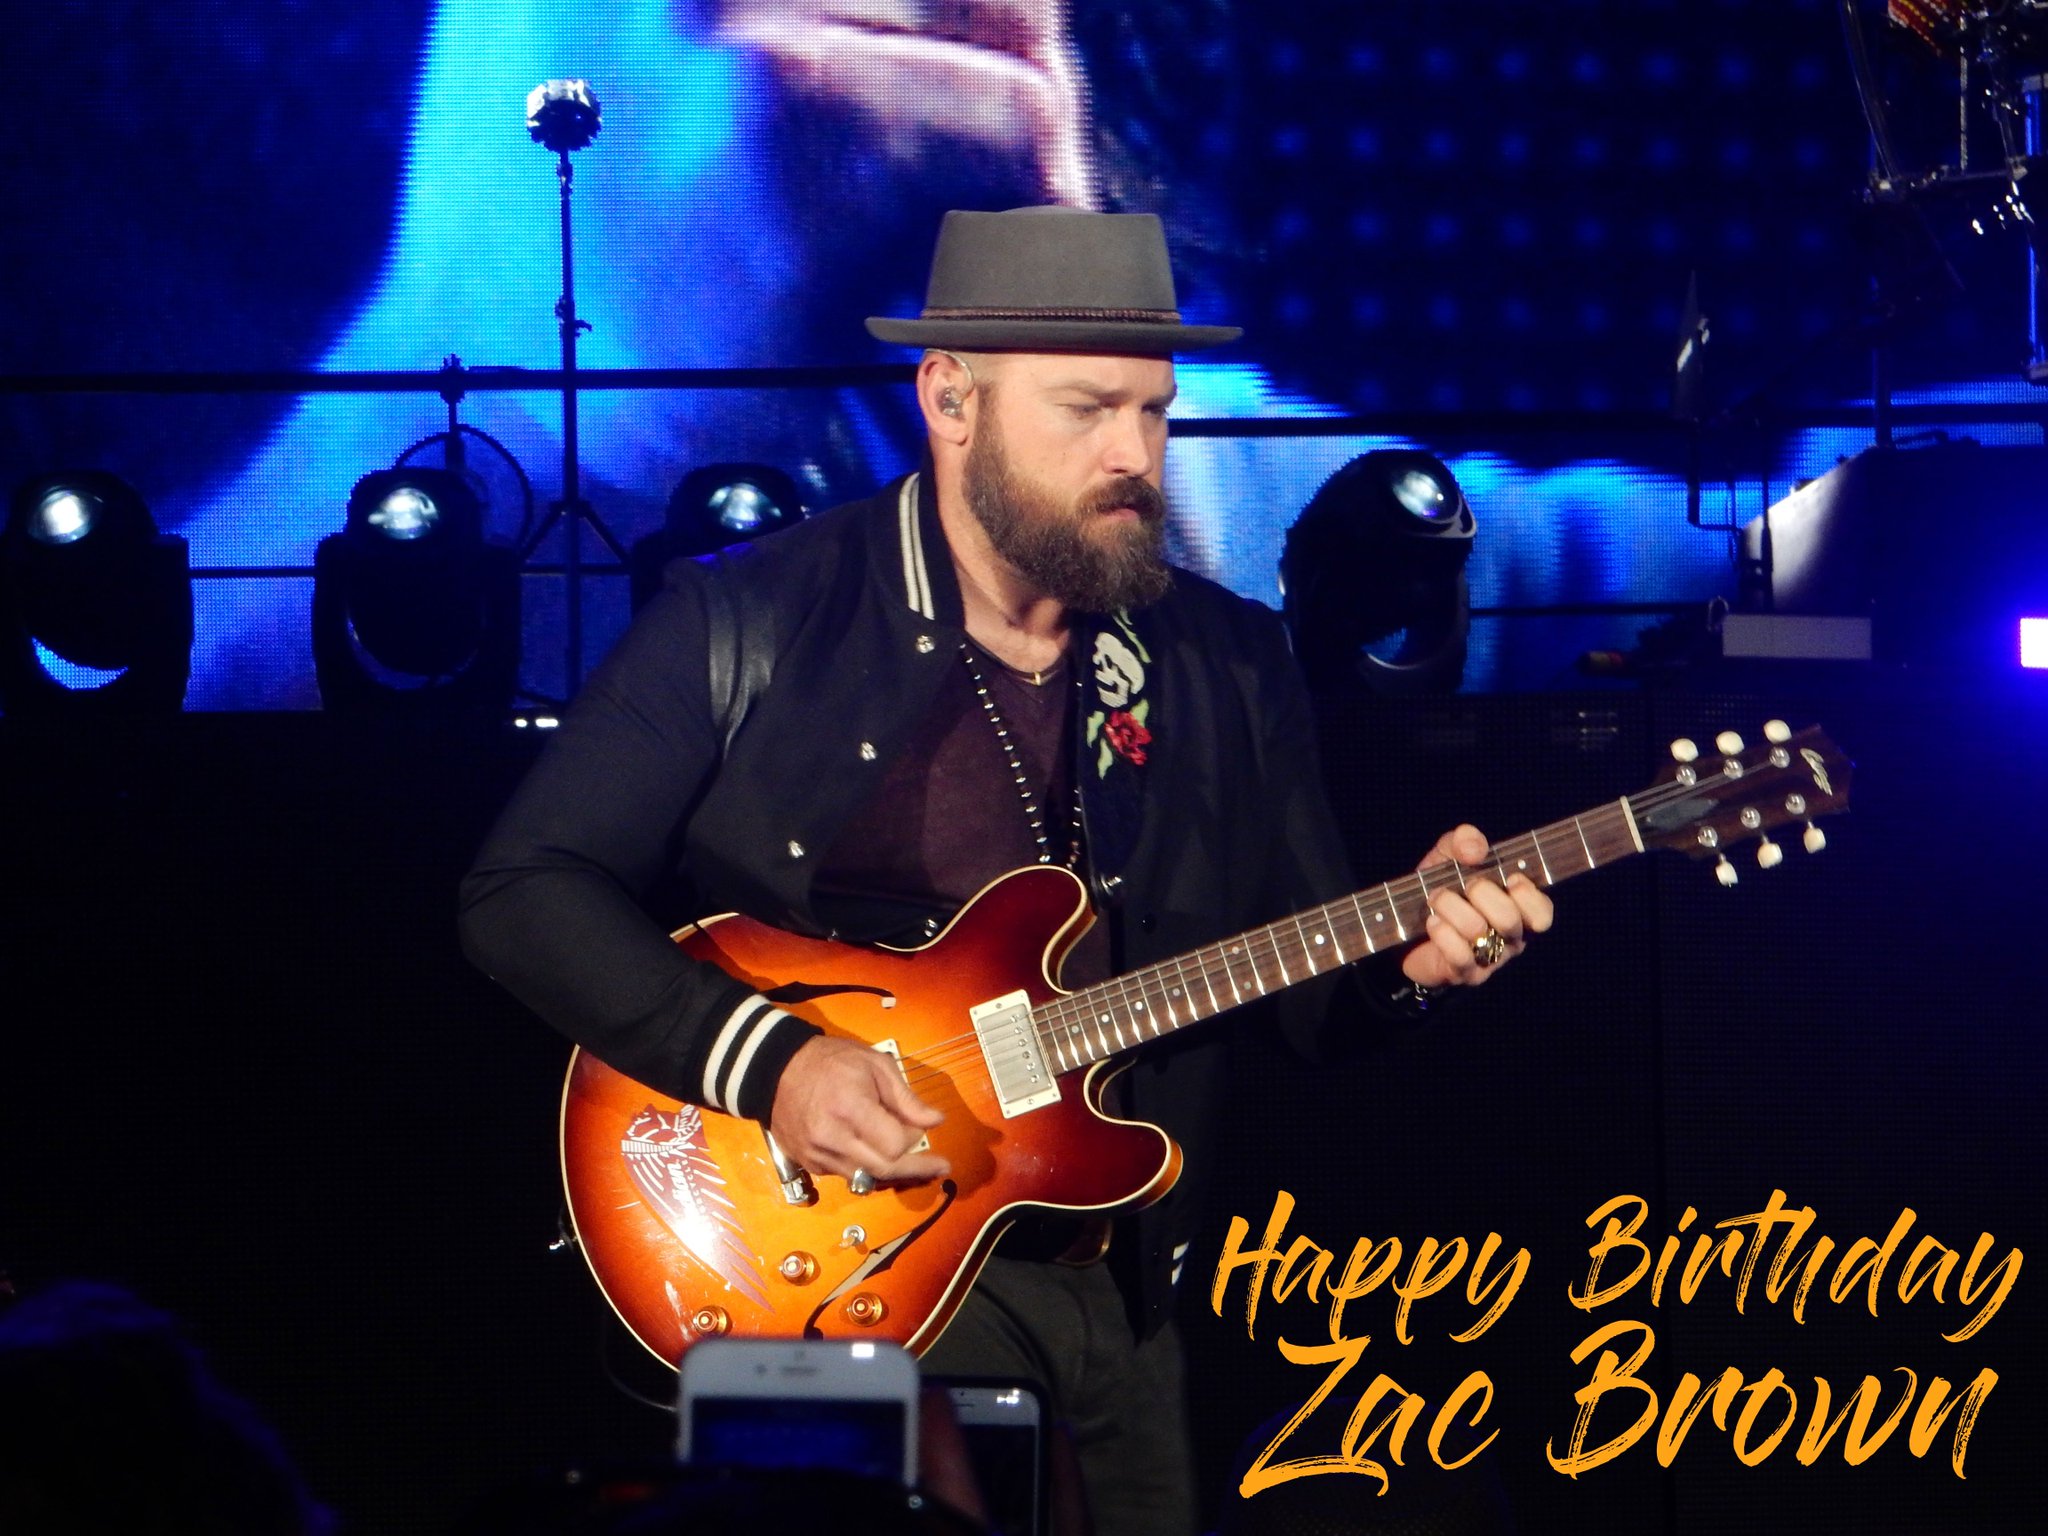 Wishing a very Happy Birthday to Zac Brown! We\ll see you in one month at 